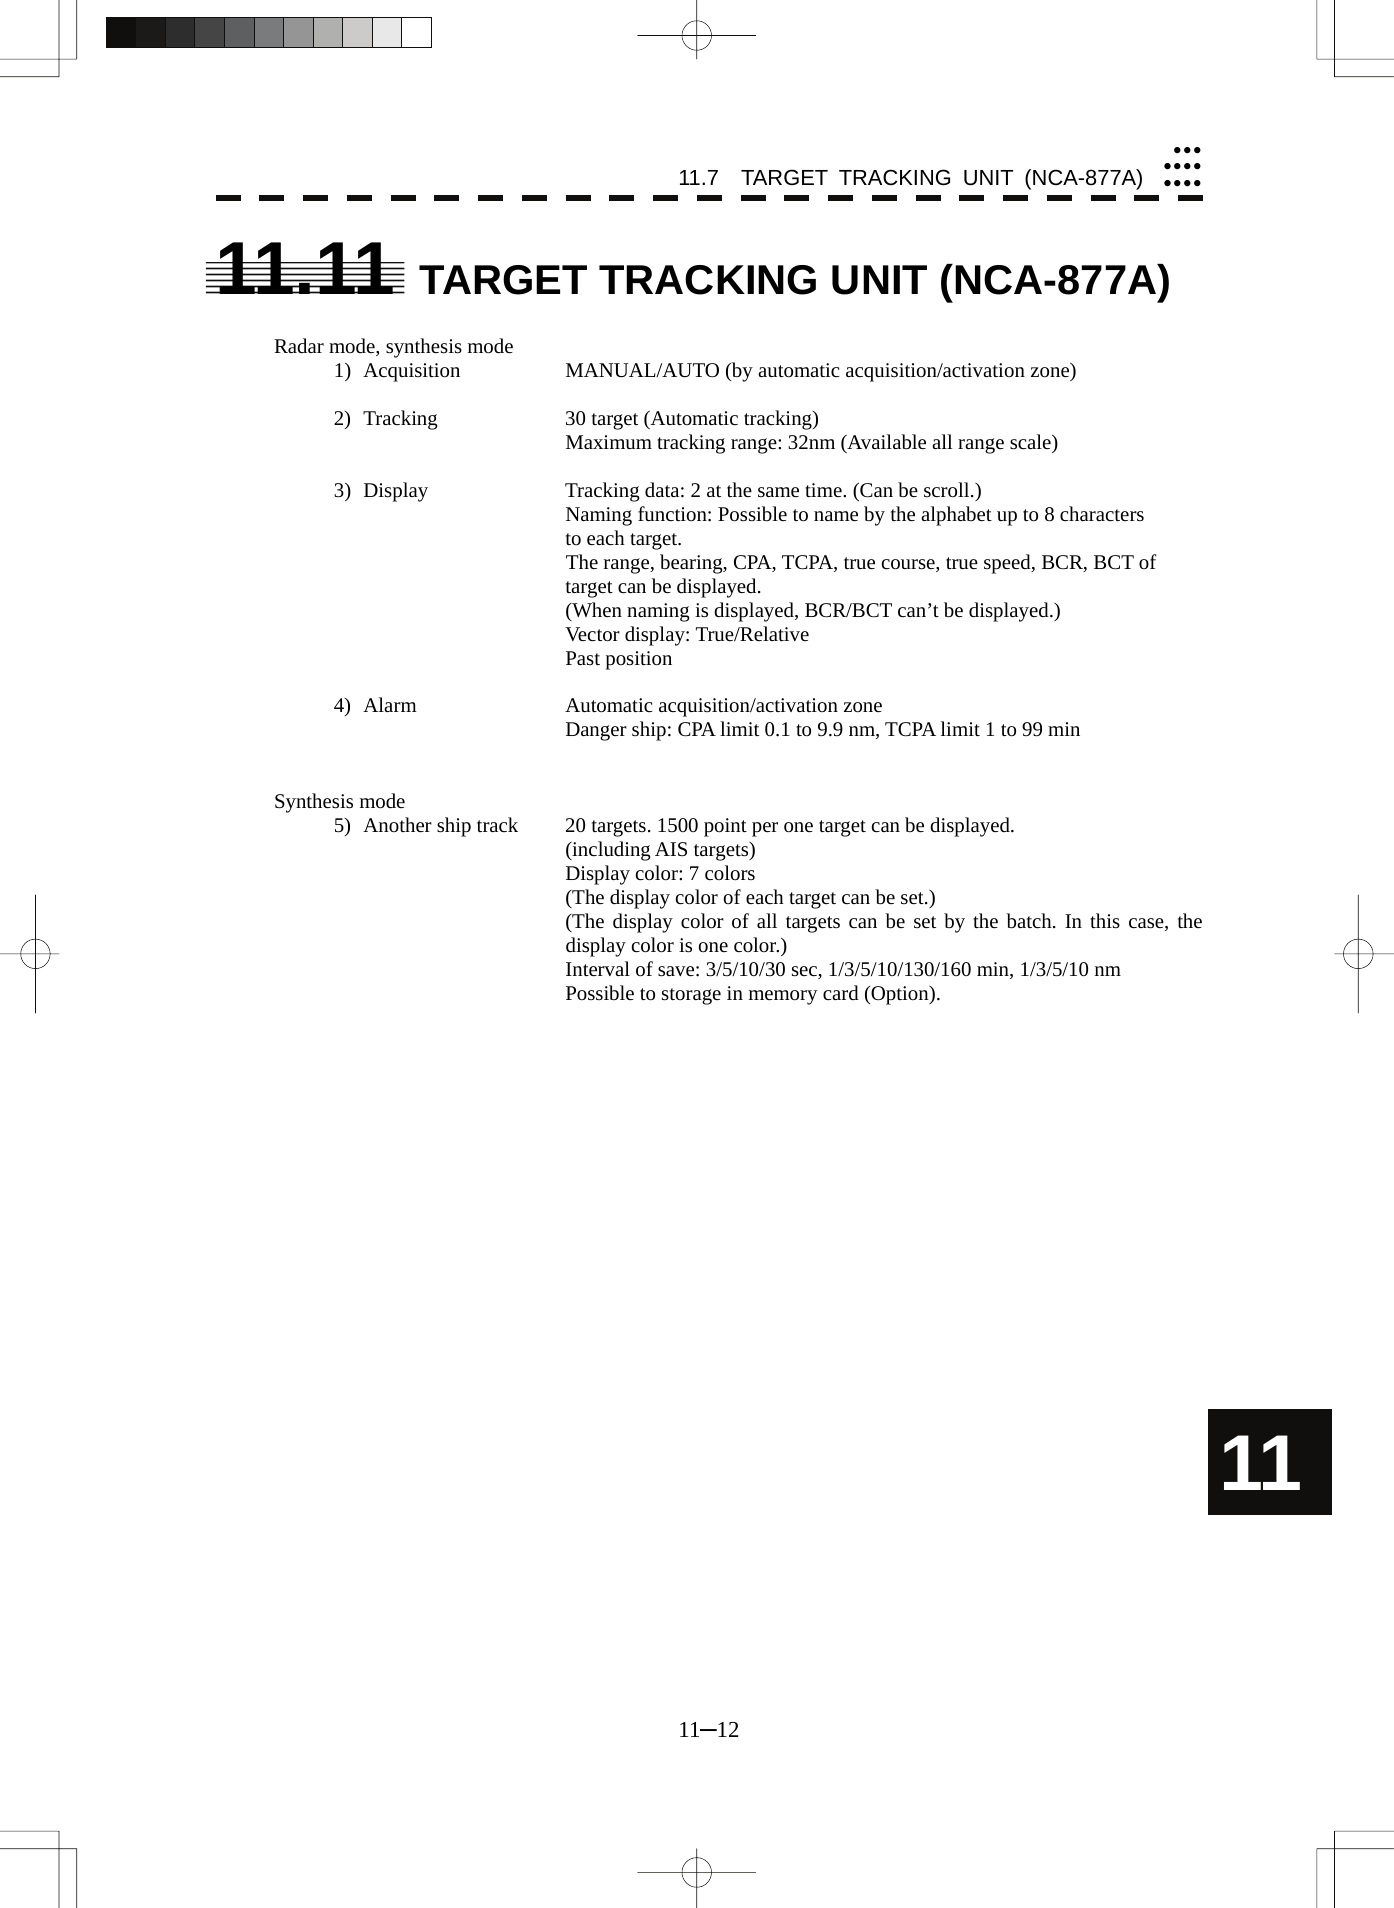 11.7  TARGET TRACKING UNIT (NCA-877A) 11─12 yyyyyyyyyyy11 11.11  TARGET TRACKING UNIT (NCA-877A)  Radar mode, synthesis mode 1)  Acquisition    MANUAL/AUTO (by automatic acquisition/activation zone)  2)  Tracking    30 target (Automatic tracking) Maximum tracking range: 32nm (Available all range scale)  3)  Display    Tracking data: 2 at the same time. (Can be scroll.) Naming function: Possible to name by the alphabet up to 8 characters to each target. The range, bearing, CPA, TCPA, true course, true speed, BCR, BCT of target can be displayed. (When naming is displayed, BCR/BCT can’t be displayed.) Vector display: True/Relative Past position  4)  Alarm    Automatic acquisition/activation zone Danger ship: CPA limit 0.1 to 9.9 nm, TCPA limit 1 to 99 min   Synthesis mode 5)  Another ship track  20 targets. 1500 point per one target can be displayed. (including AIS targets) Display color: 7 colors (The display color of each target can be set.) (The display color of all targets can be set by the batch. In this case, the display color is one color.) Interval of save: 3/5/10/30 sec, 1/3/5/10/130/160 min, 1/3/5/10 nm   Possible to storage in memory card (Option).    